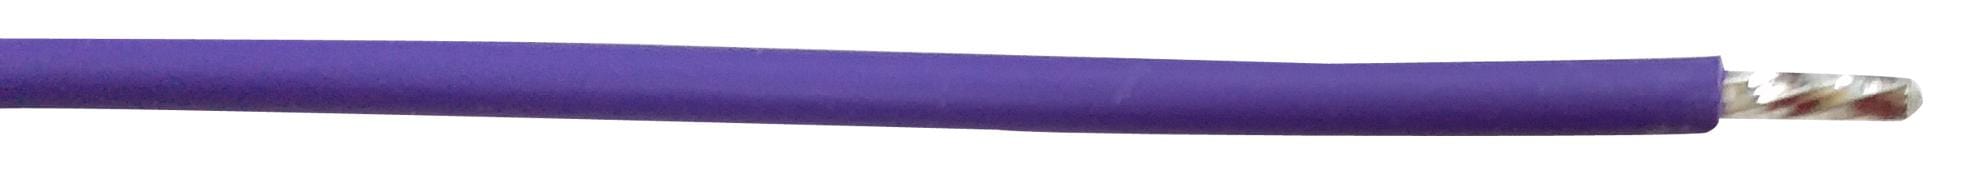 PRO POWER Single Wire PP002325 HOOK-UP WIRE, 24AWG, PURPLE, 305M, 300V PRO POWER 2919484 PP002325